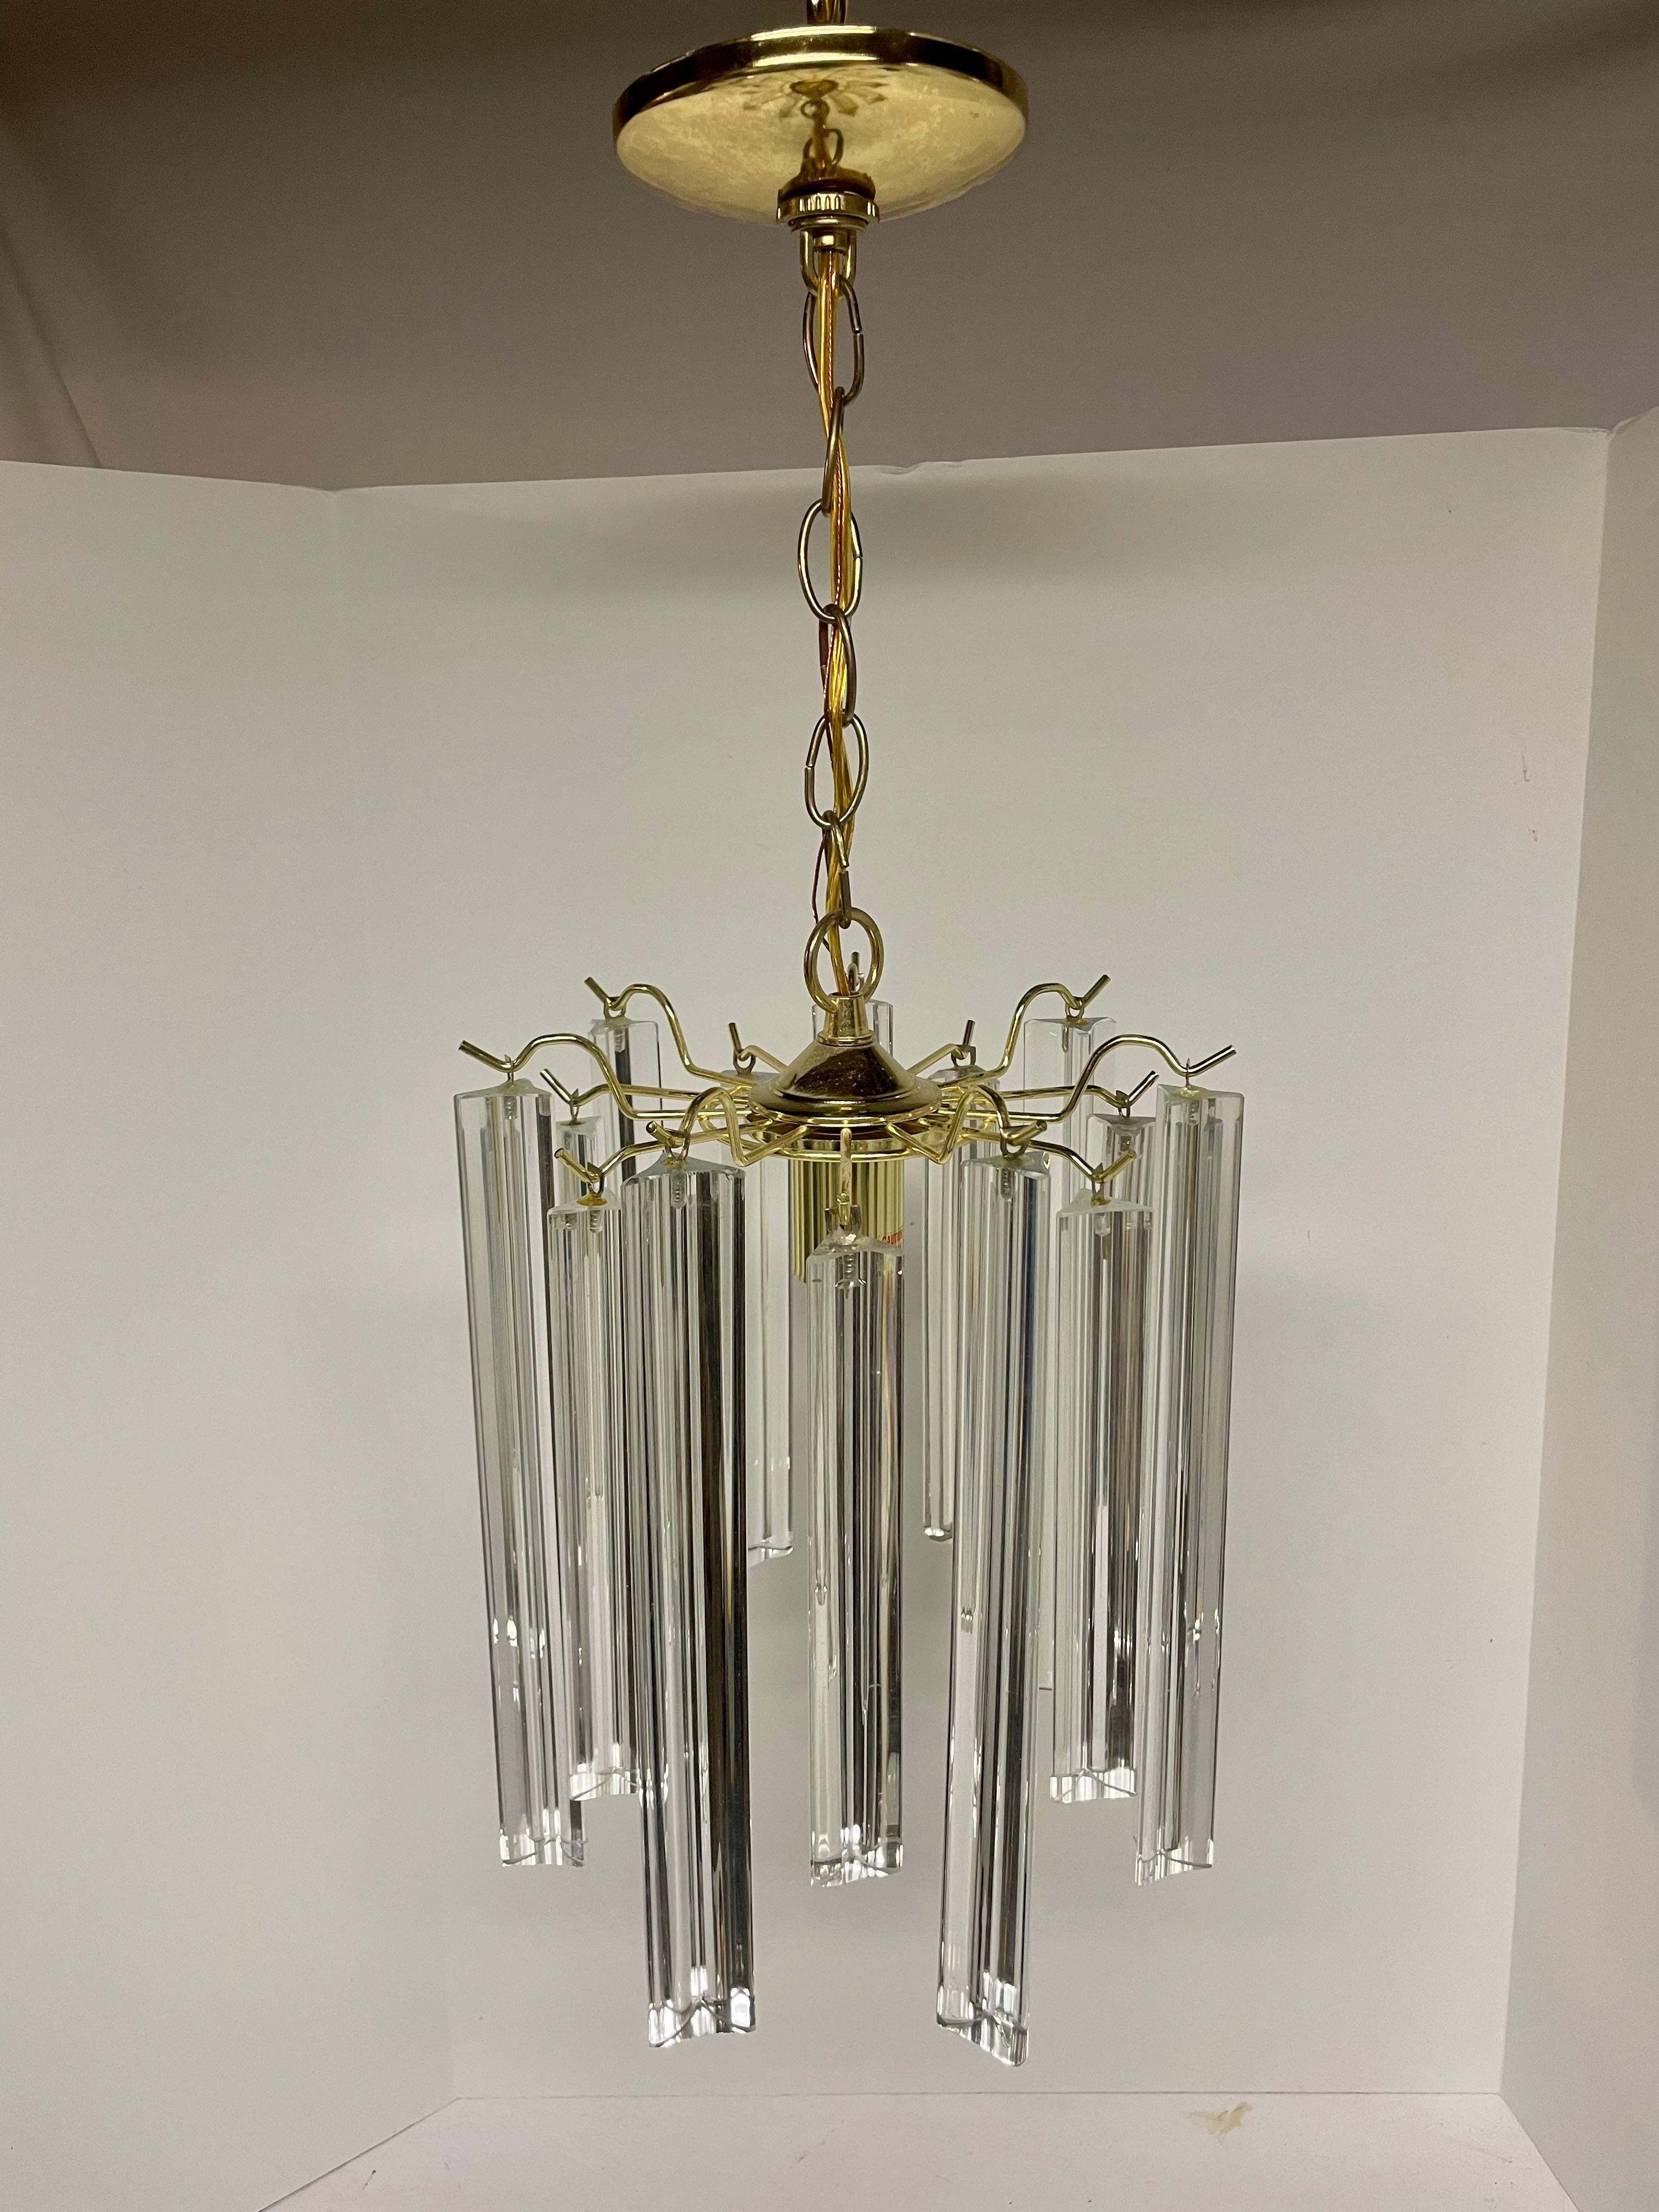 Venini style crystal chandelier with triade crystals. Single medium base socket with brass frame and original ceiling cap. Wired and ready to use, 10